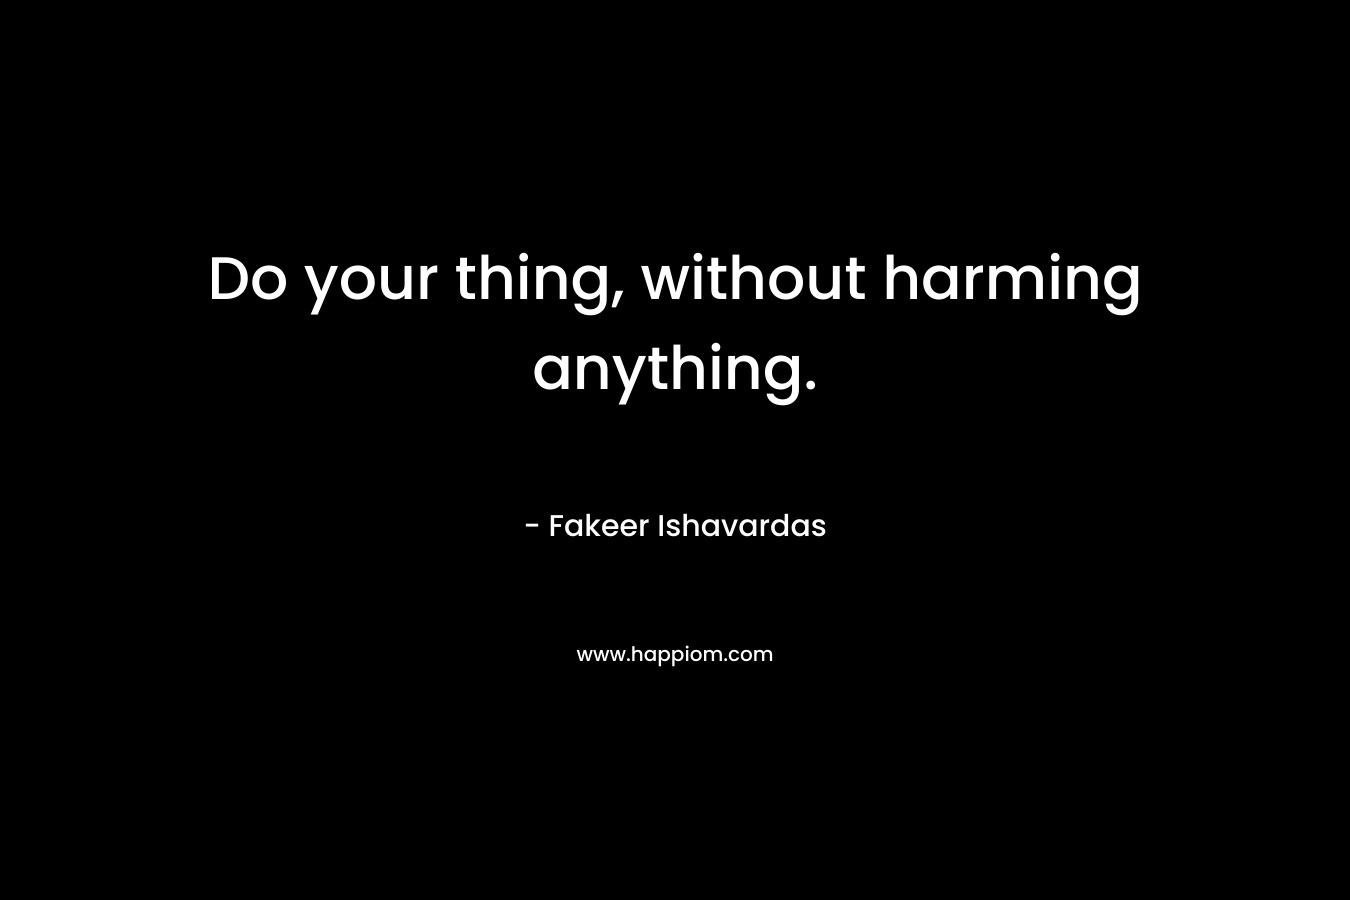 Do your thing, without harming anything. – Fakeer Ishavardas